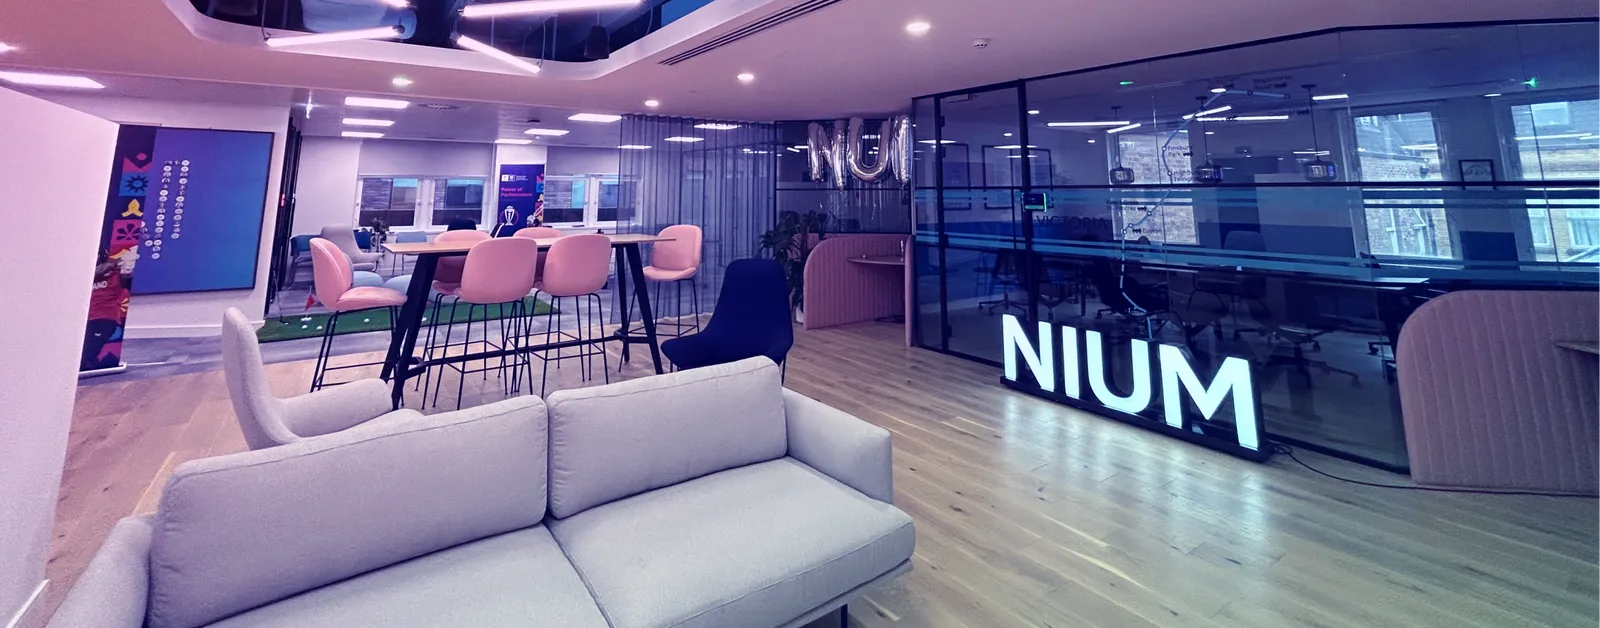 Cross-border Payments Leader, Nium, Expands European Operations with New Regional Headquarters in London’s Square Mile